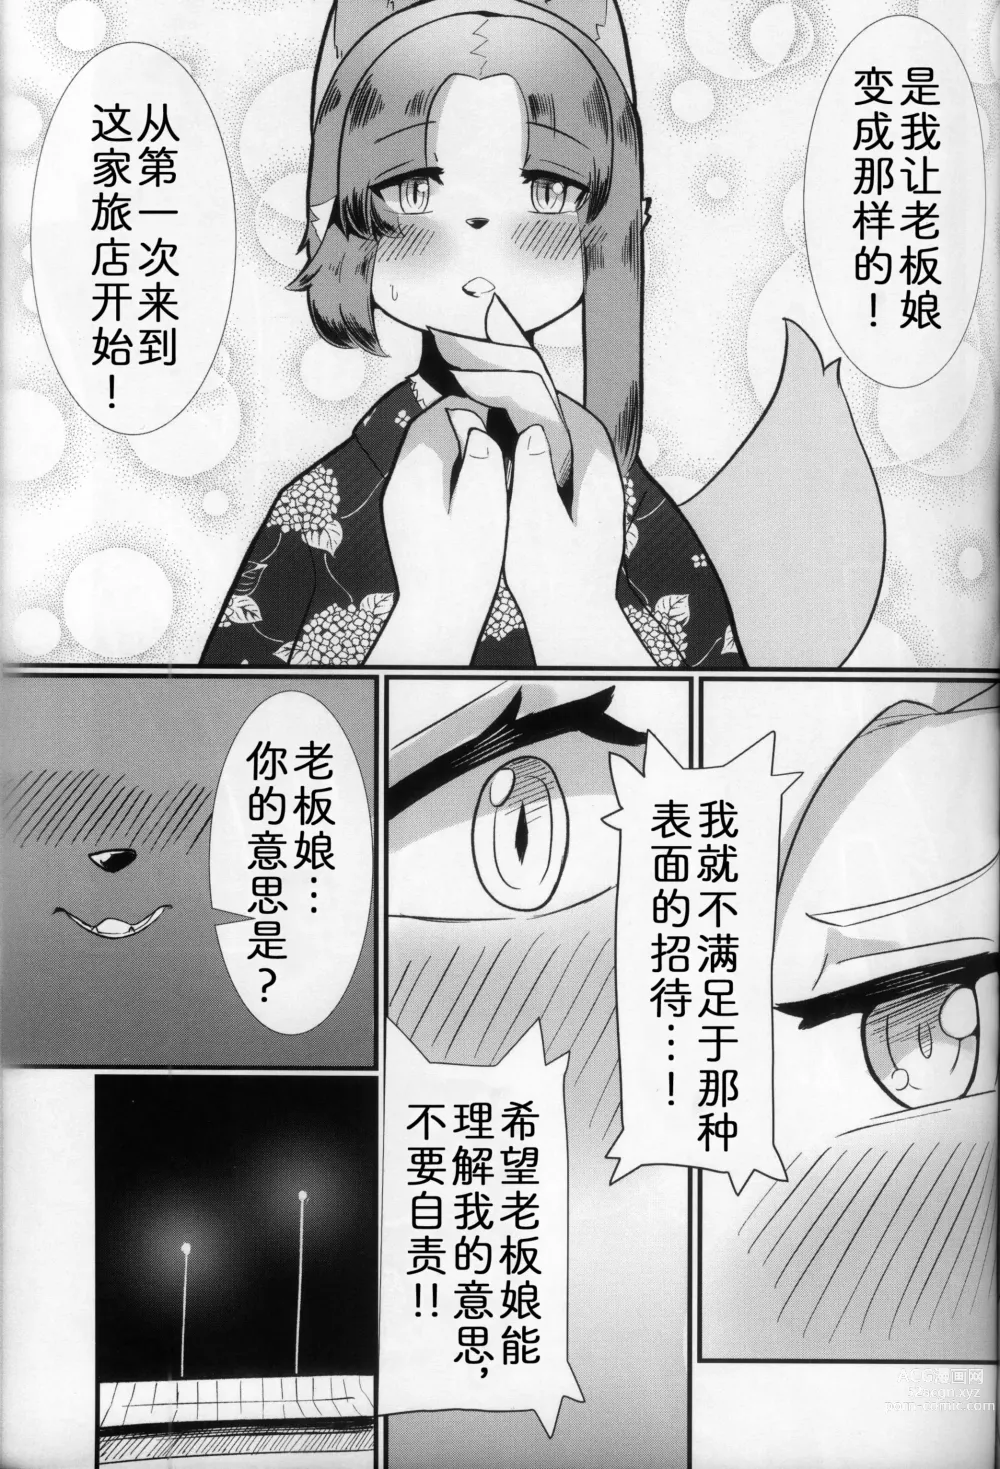 Page 23 of doujinshi 七彩之蝶